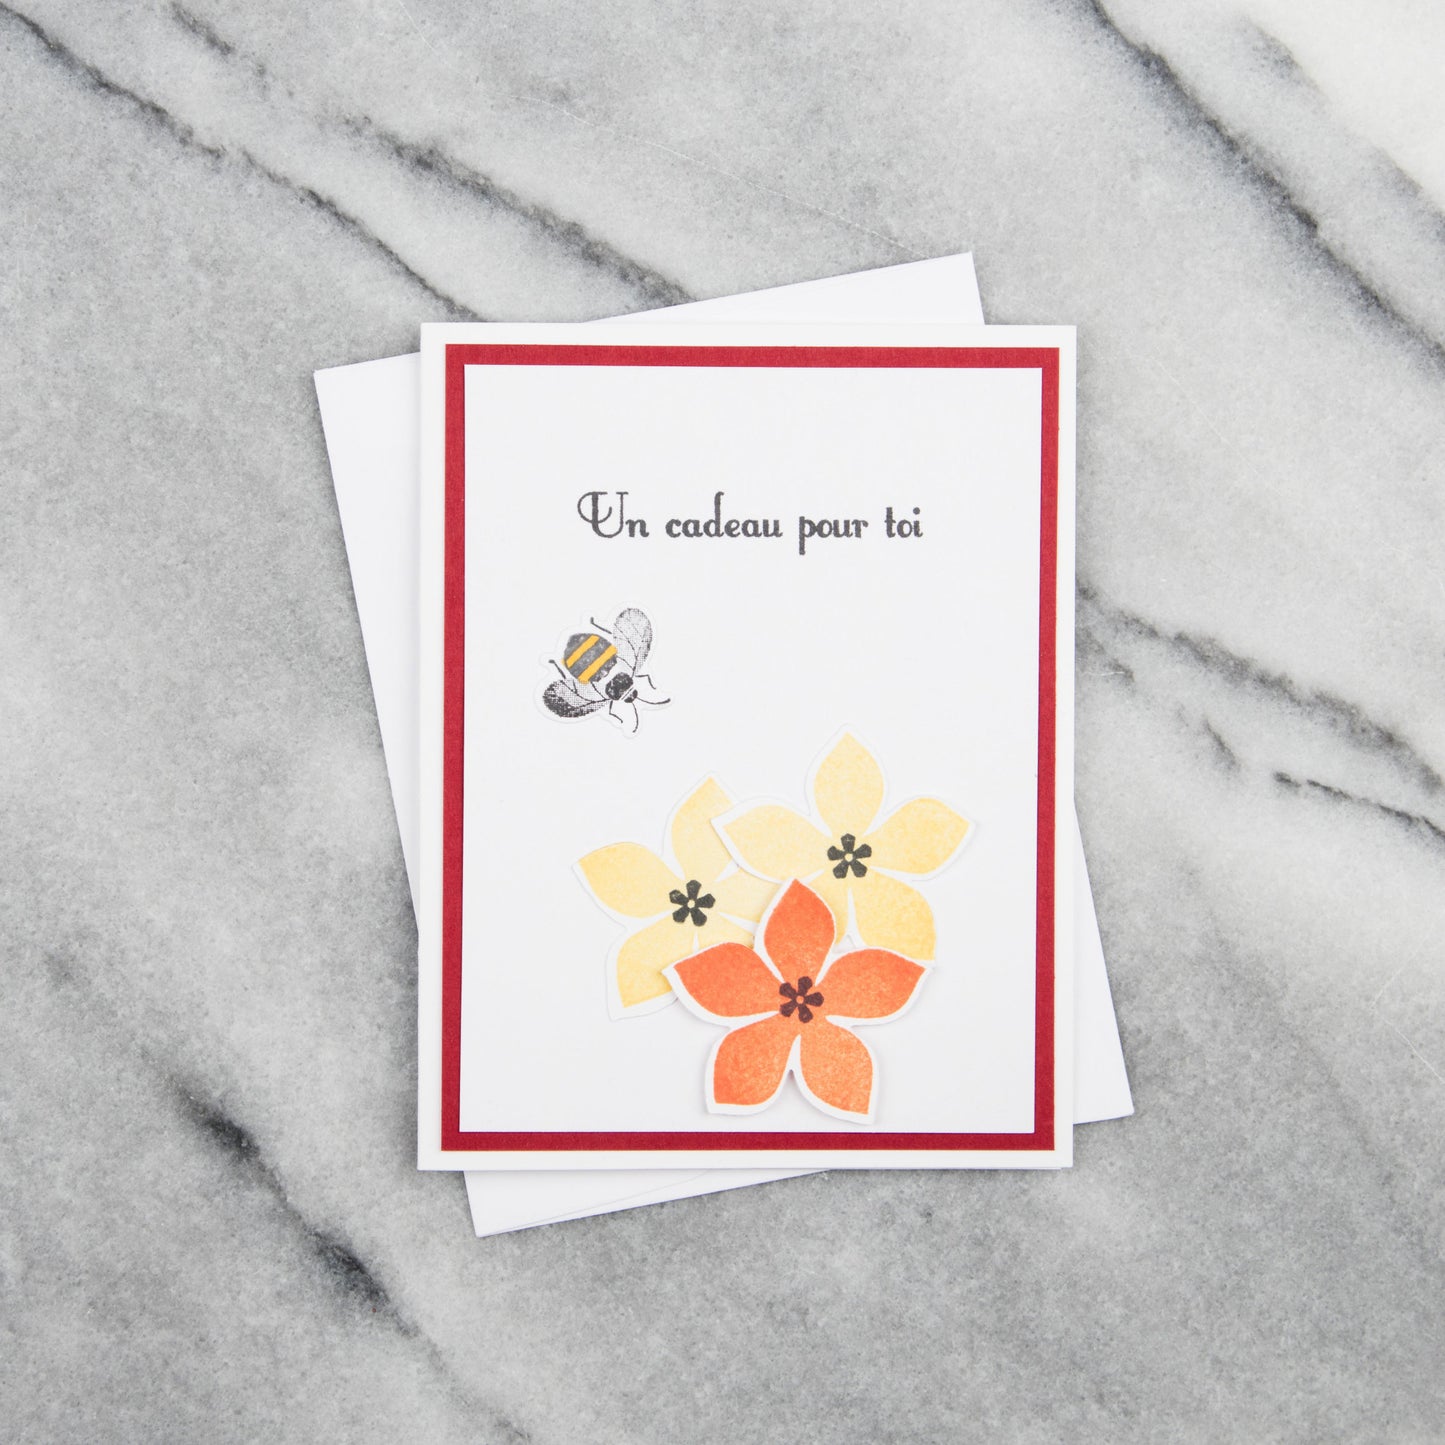 Pop-up greeting card with honeybee, flowers and text that says a gift for you in French